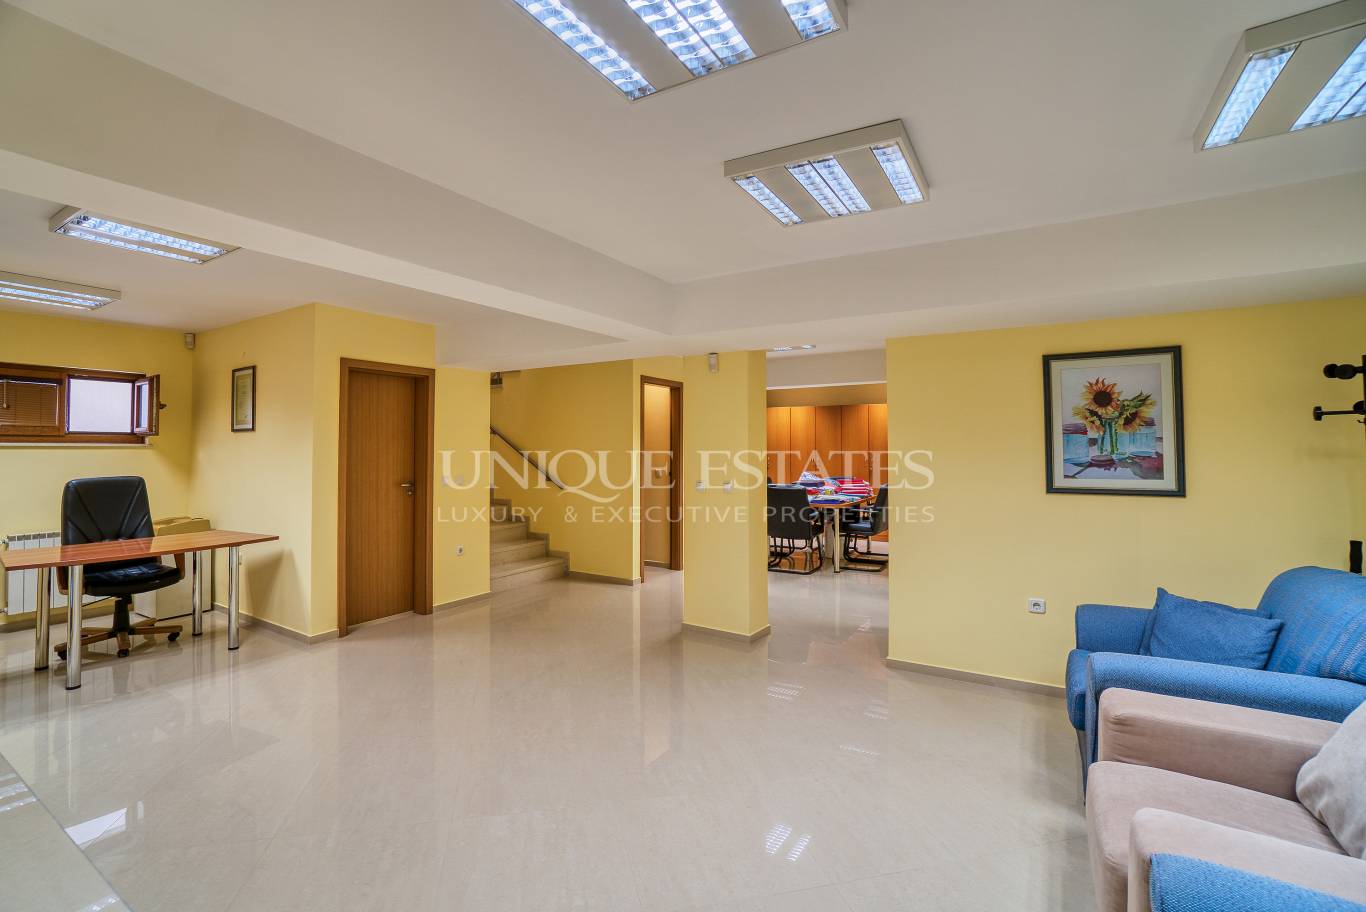 Office for sale in Sofia, Downtown with listing ID: K14097 - image 6